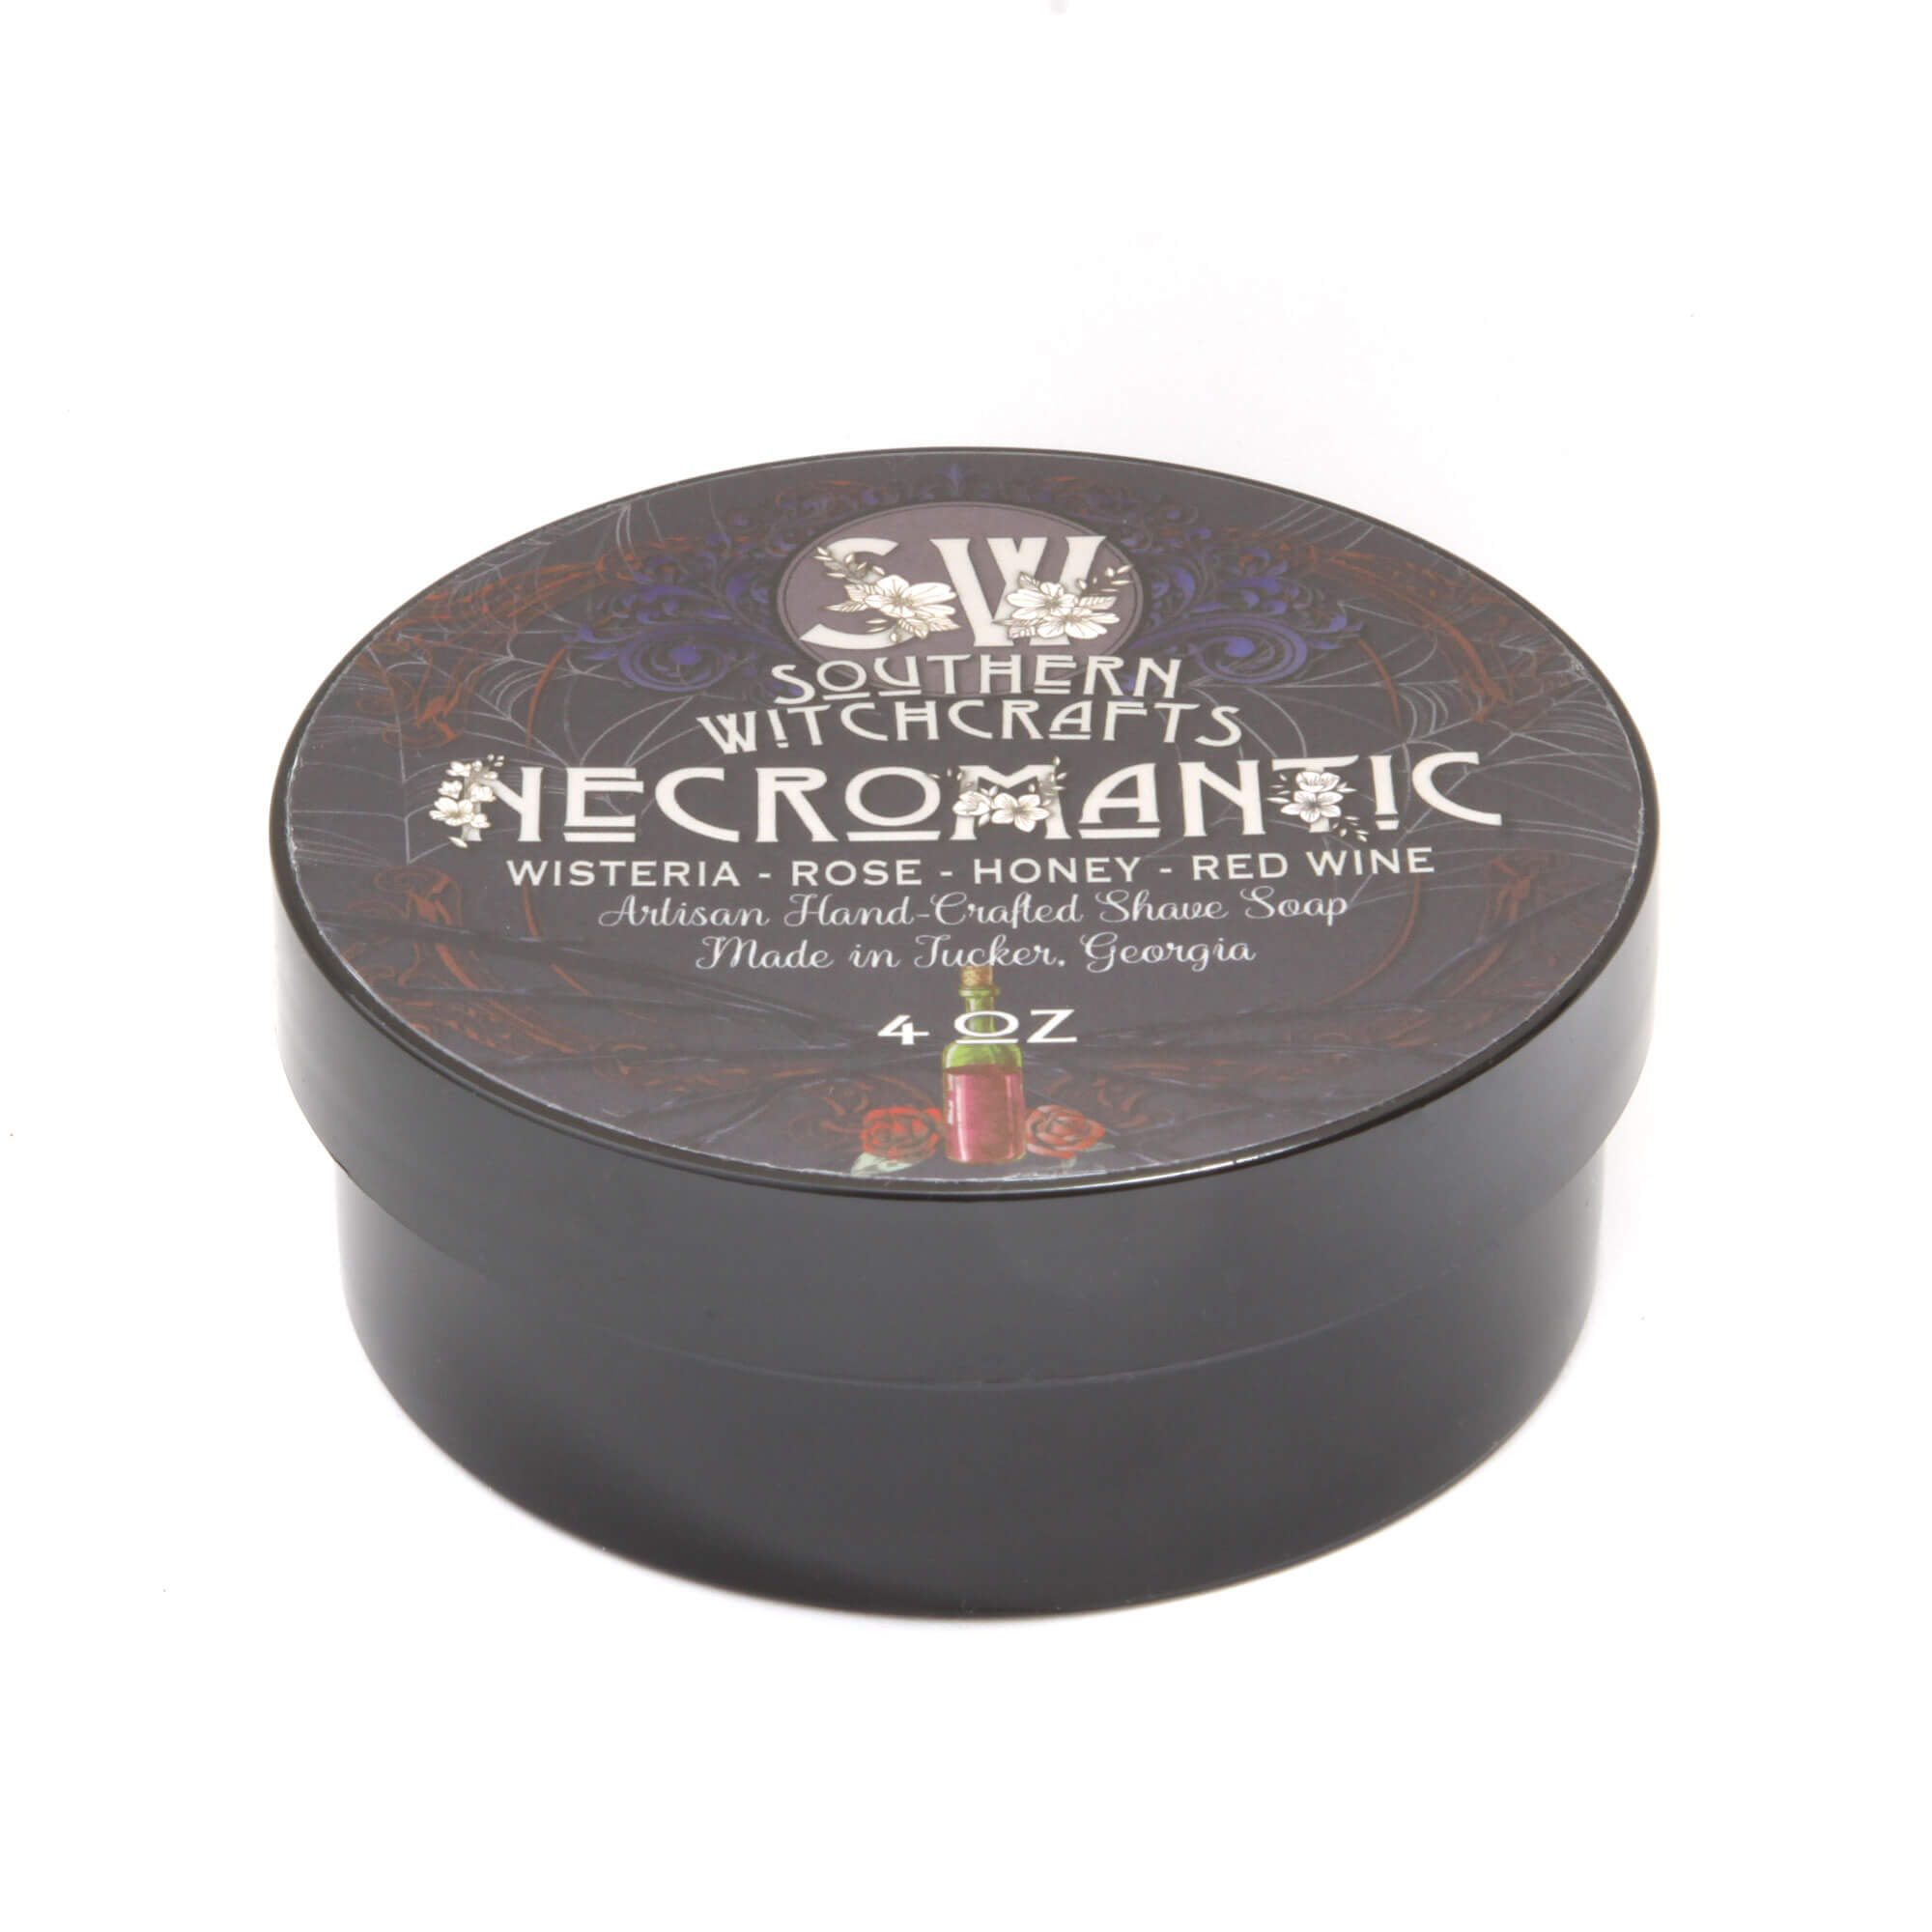 Southern Witchcrafts Necromantic Shaving Soap